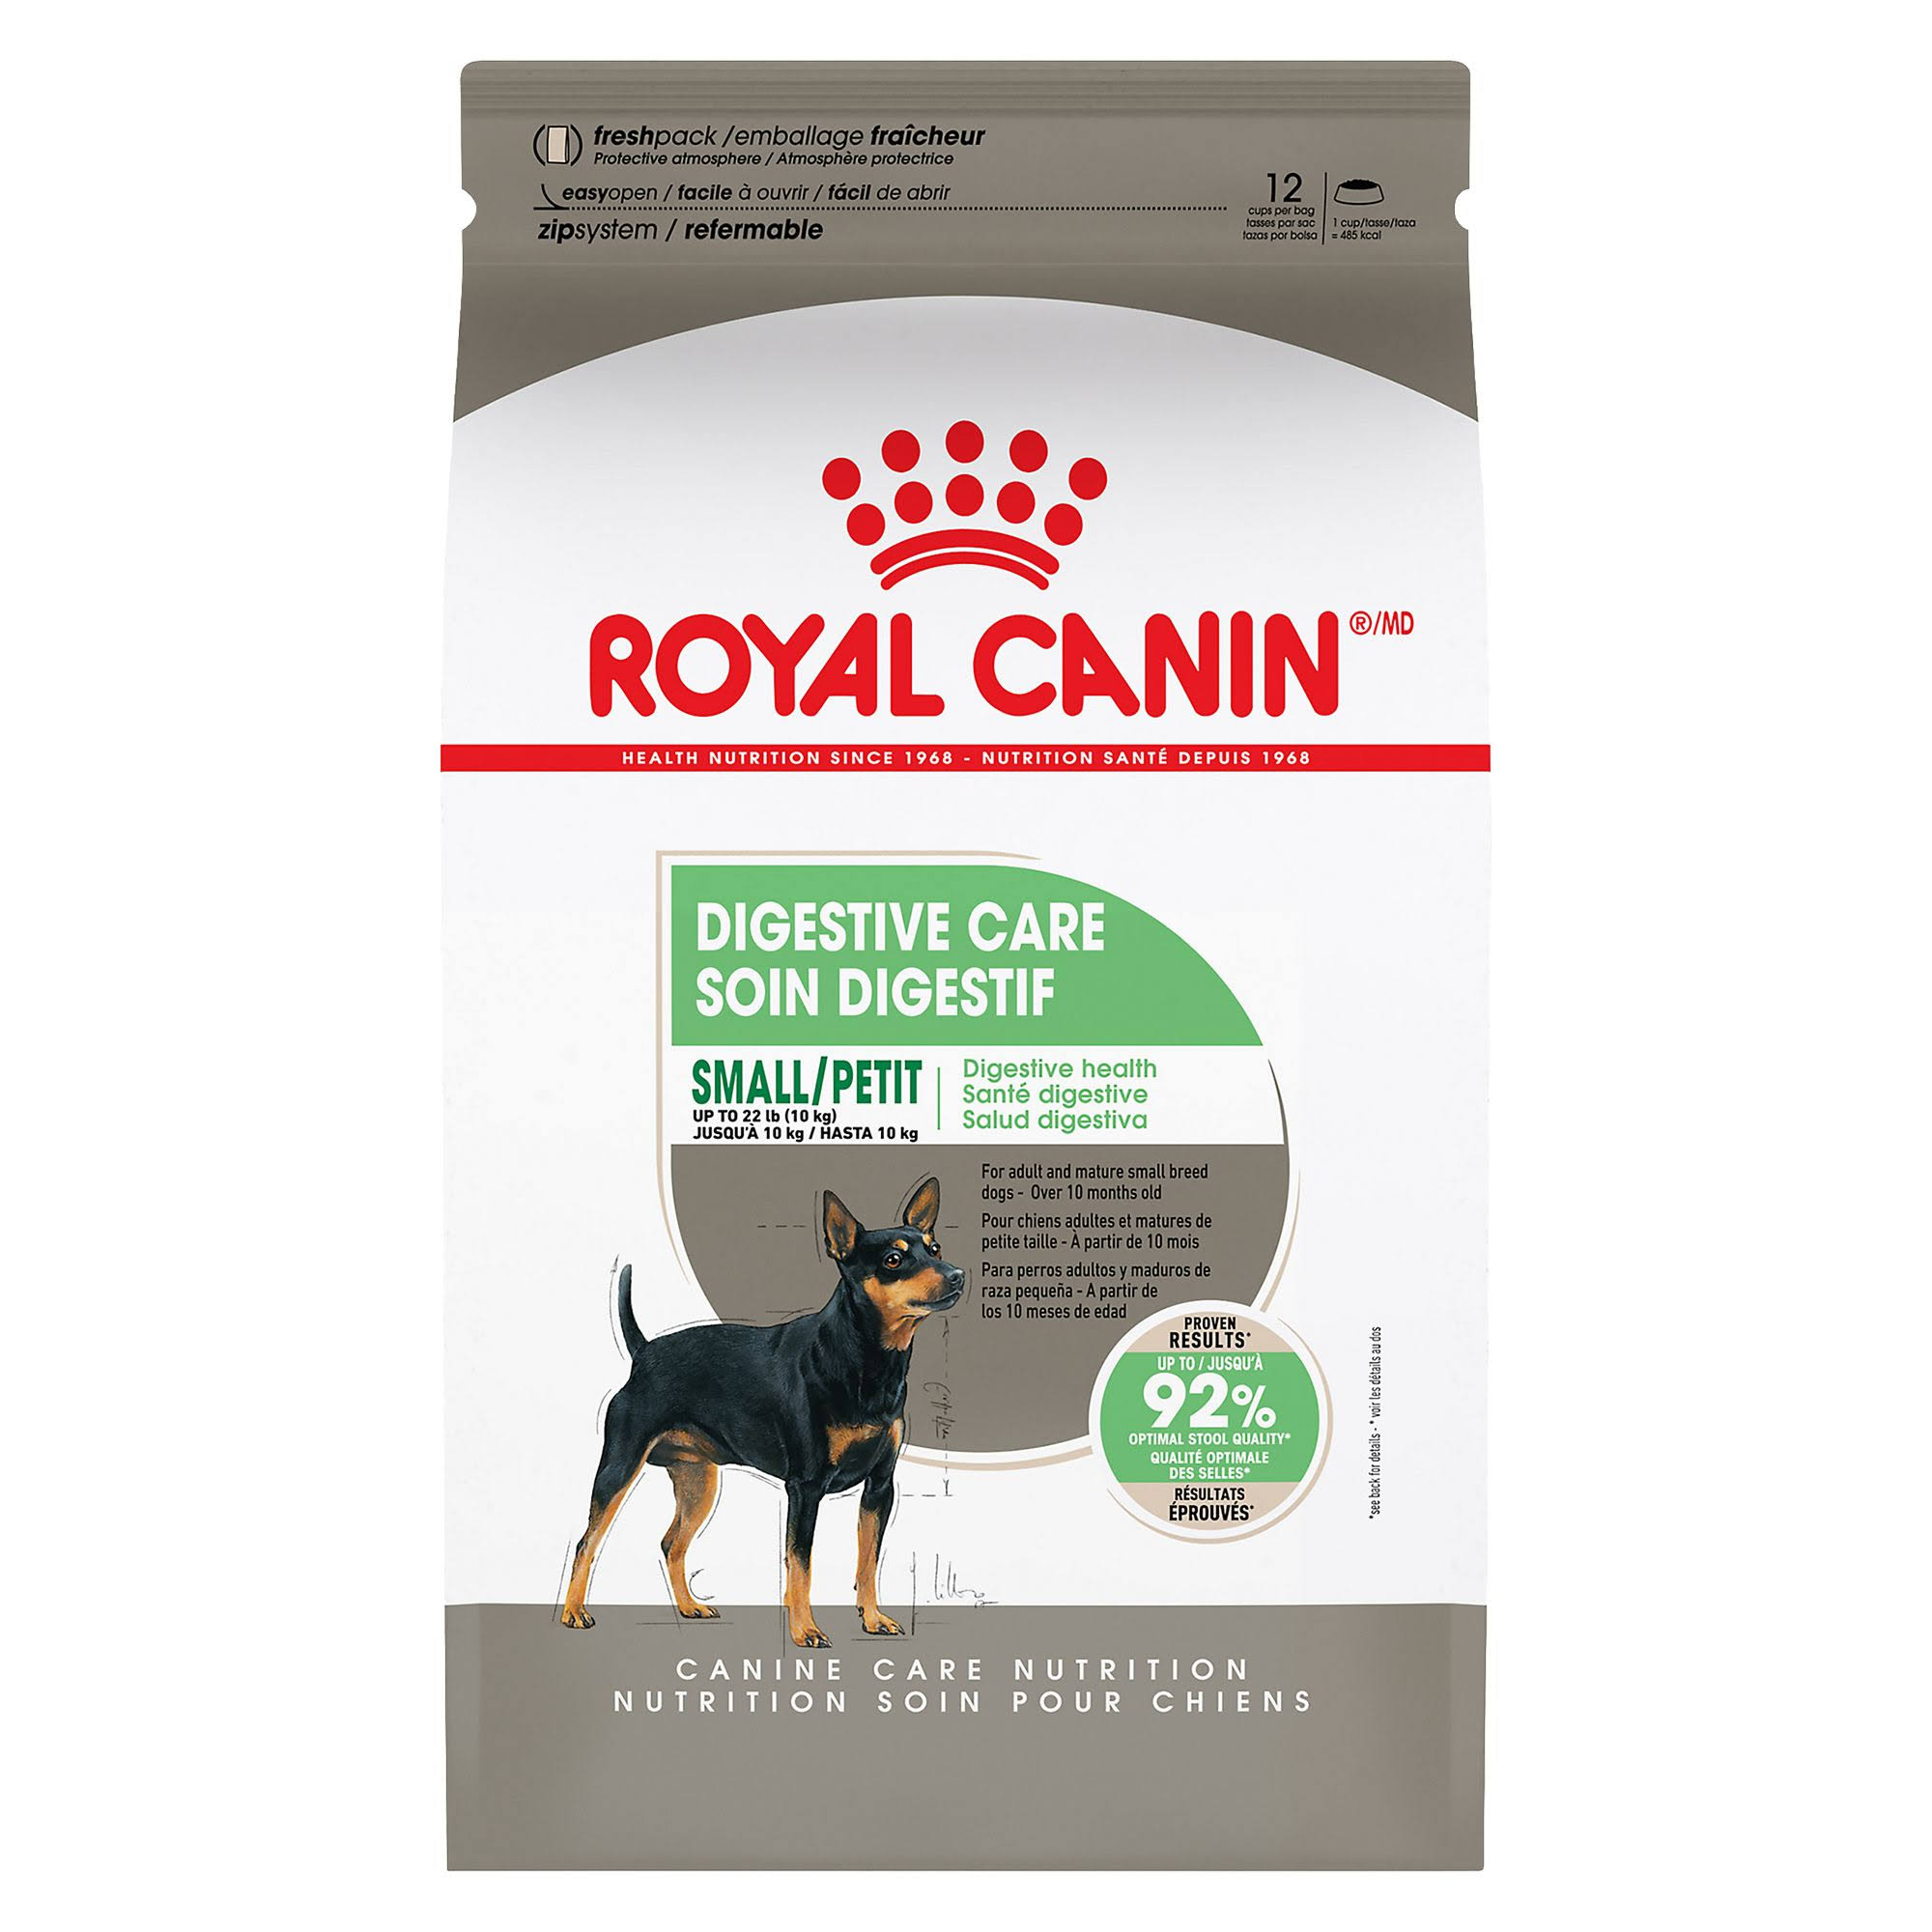 Royal Canin Size Health Nutrition Mini Special Dry Dog Food